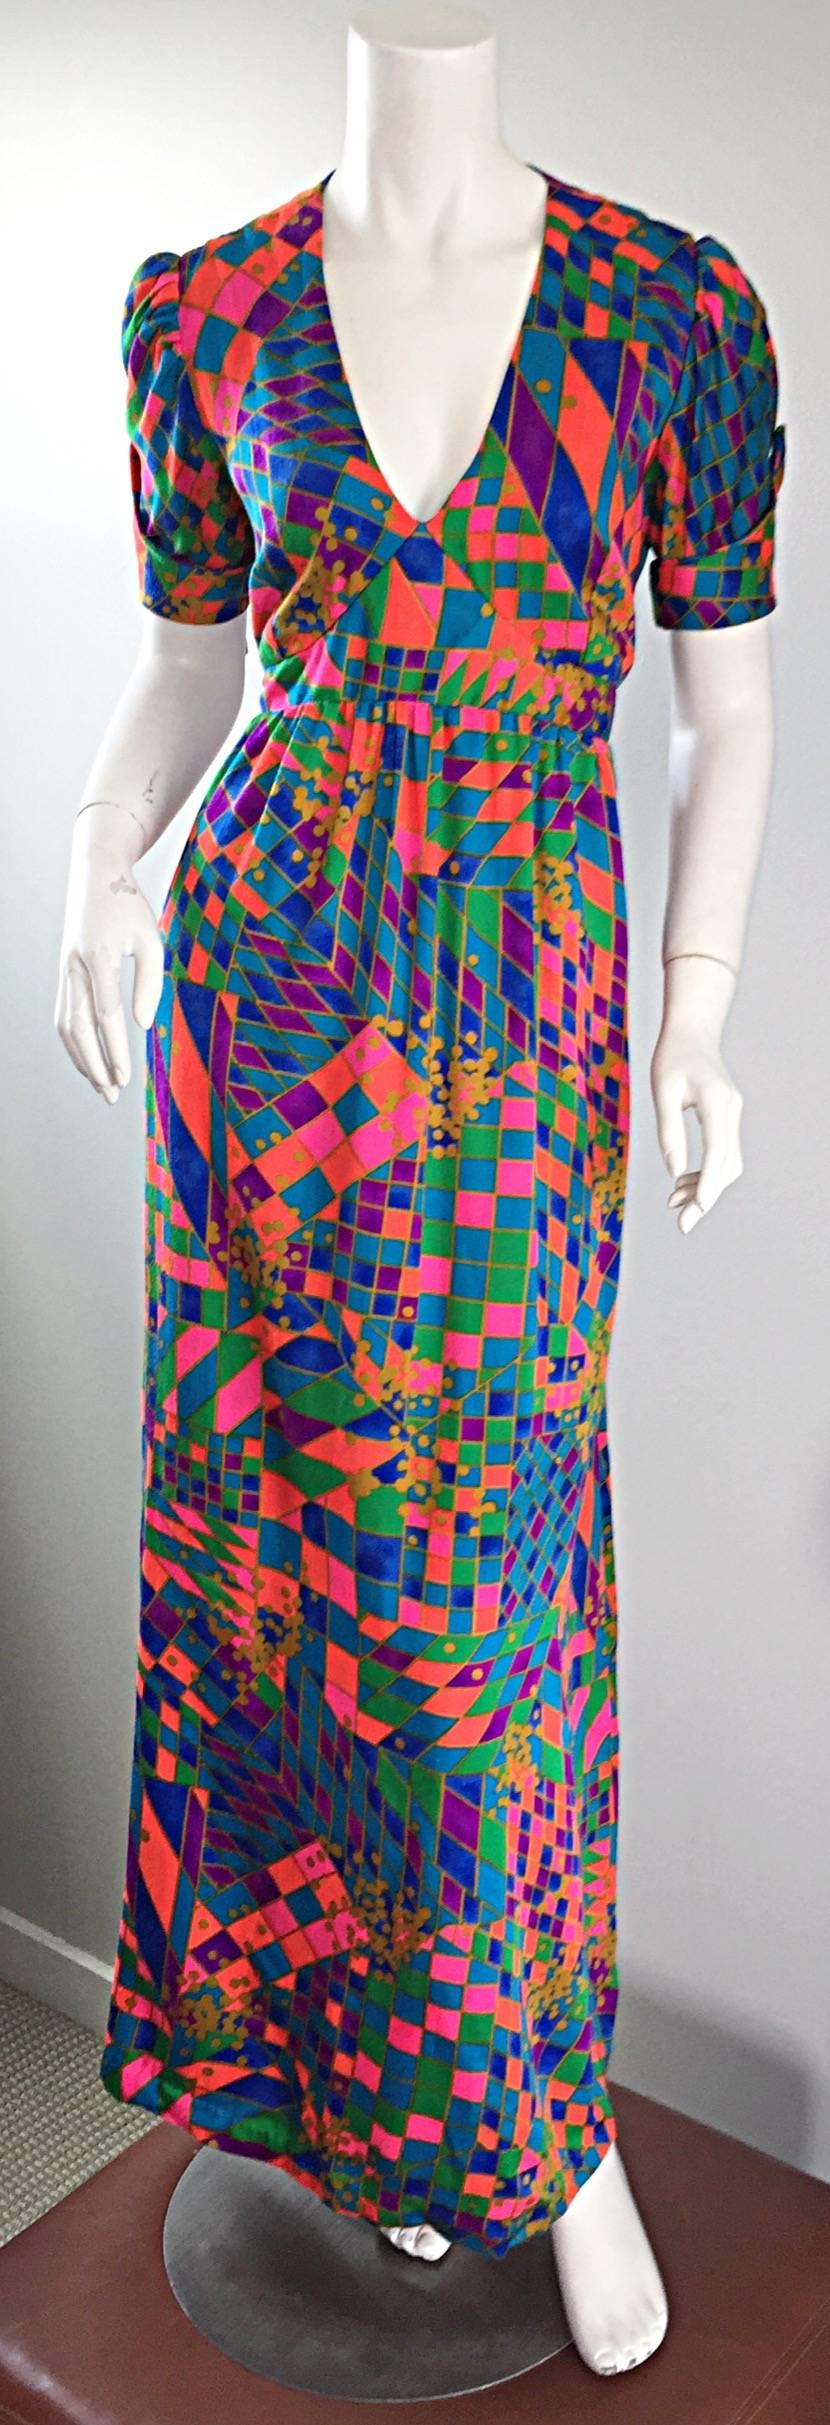 AMAZING and super rare vintage 70s DEAR dress! I have only had the privilege of owning one dress from this label before. I was super excited about that dress, BUT this dress takes the cake! Quite possibly my favorite 70s boho dress EVER! Vibrant